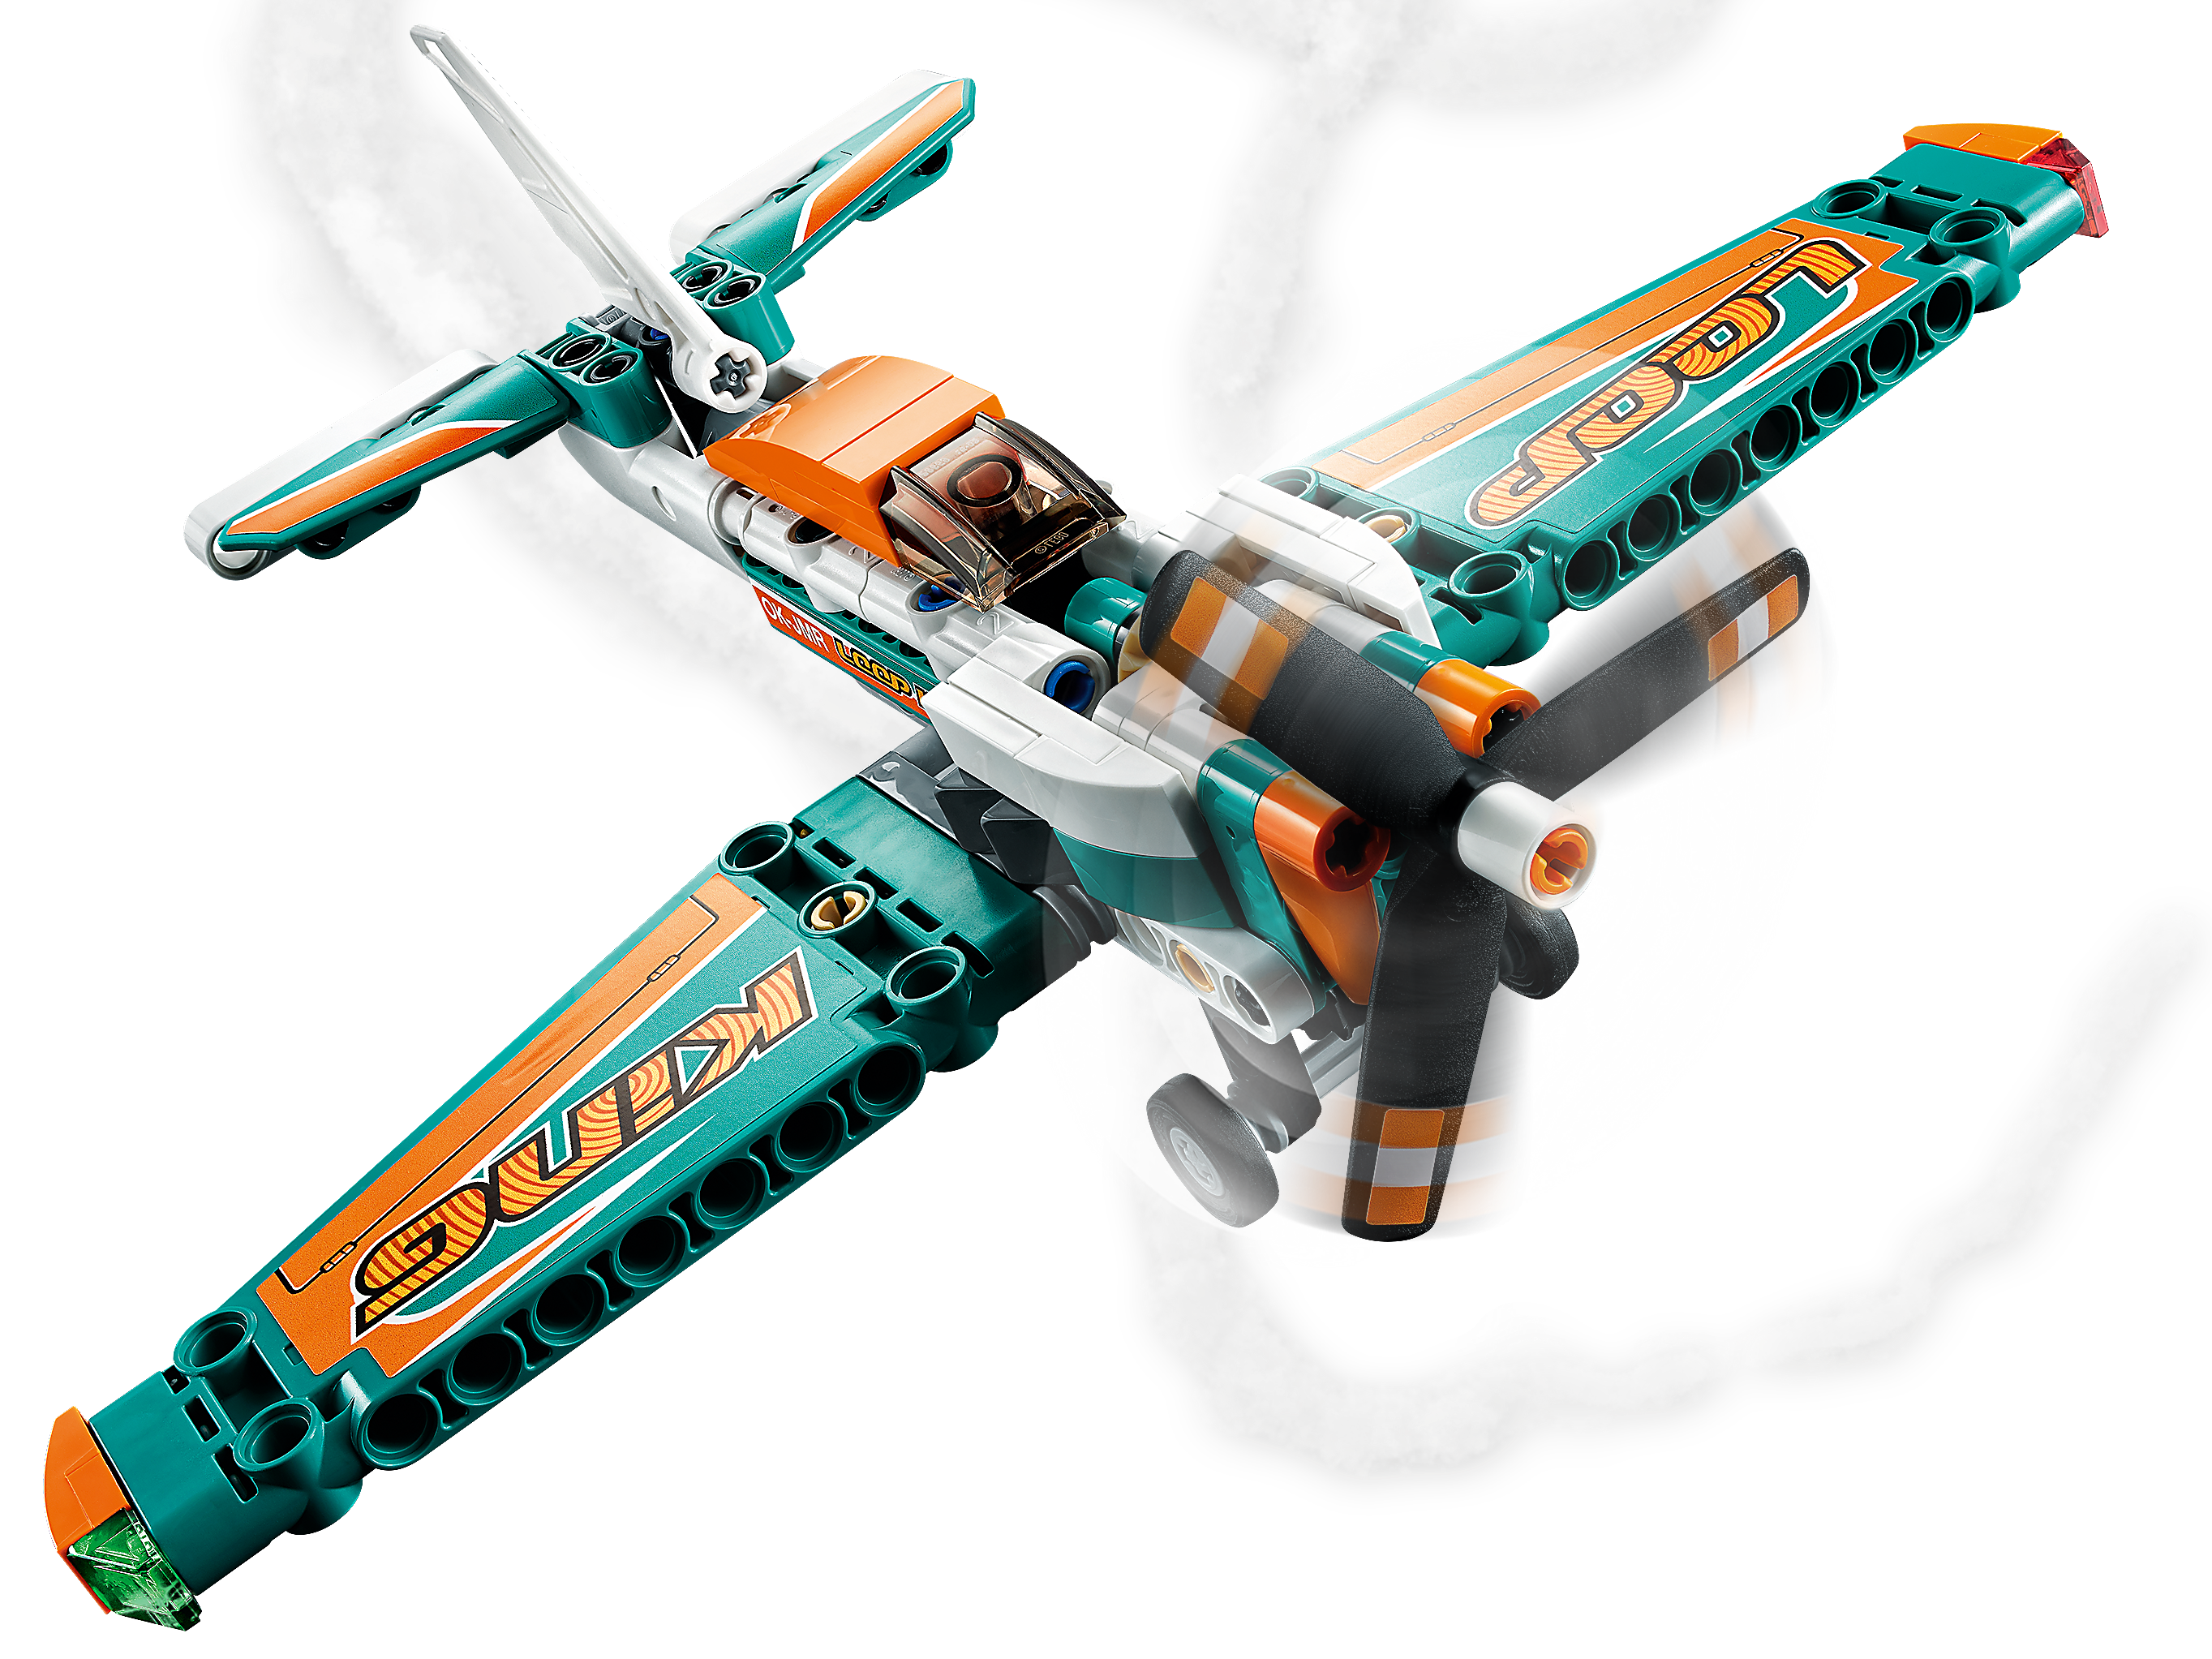 Race Plane 42117 | Technic™ | Buy online at the Official LEGO® Shop US